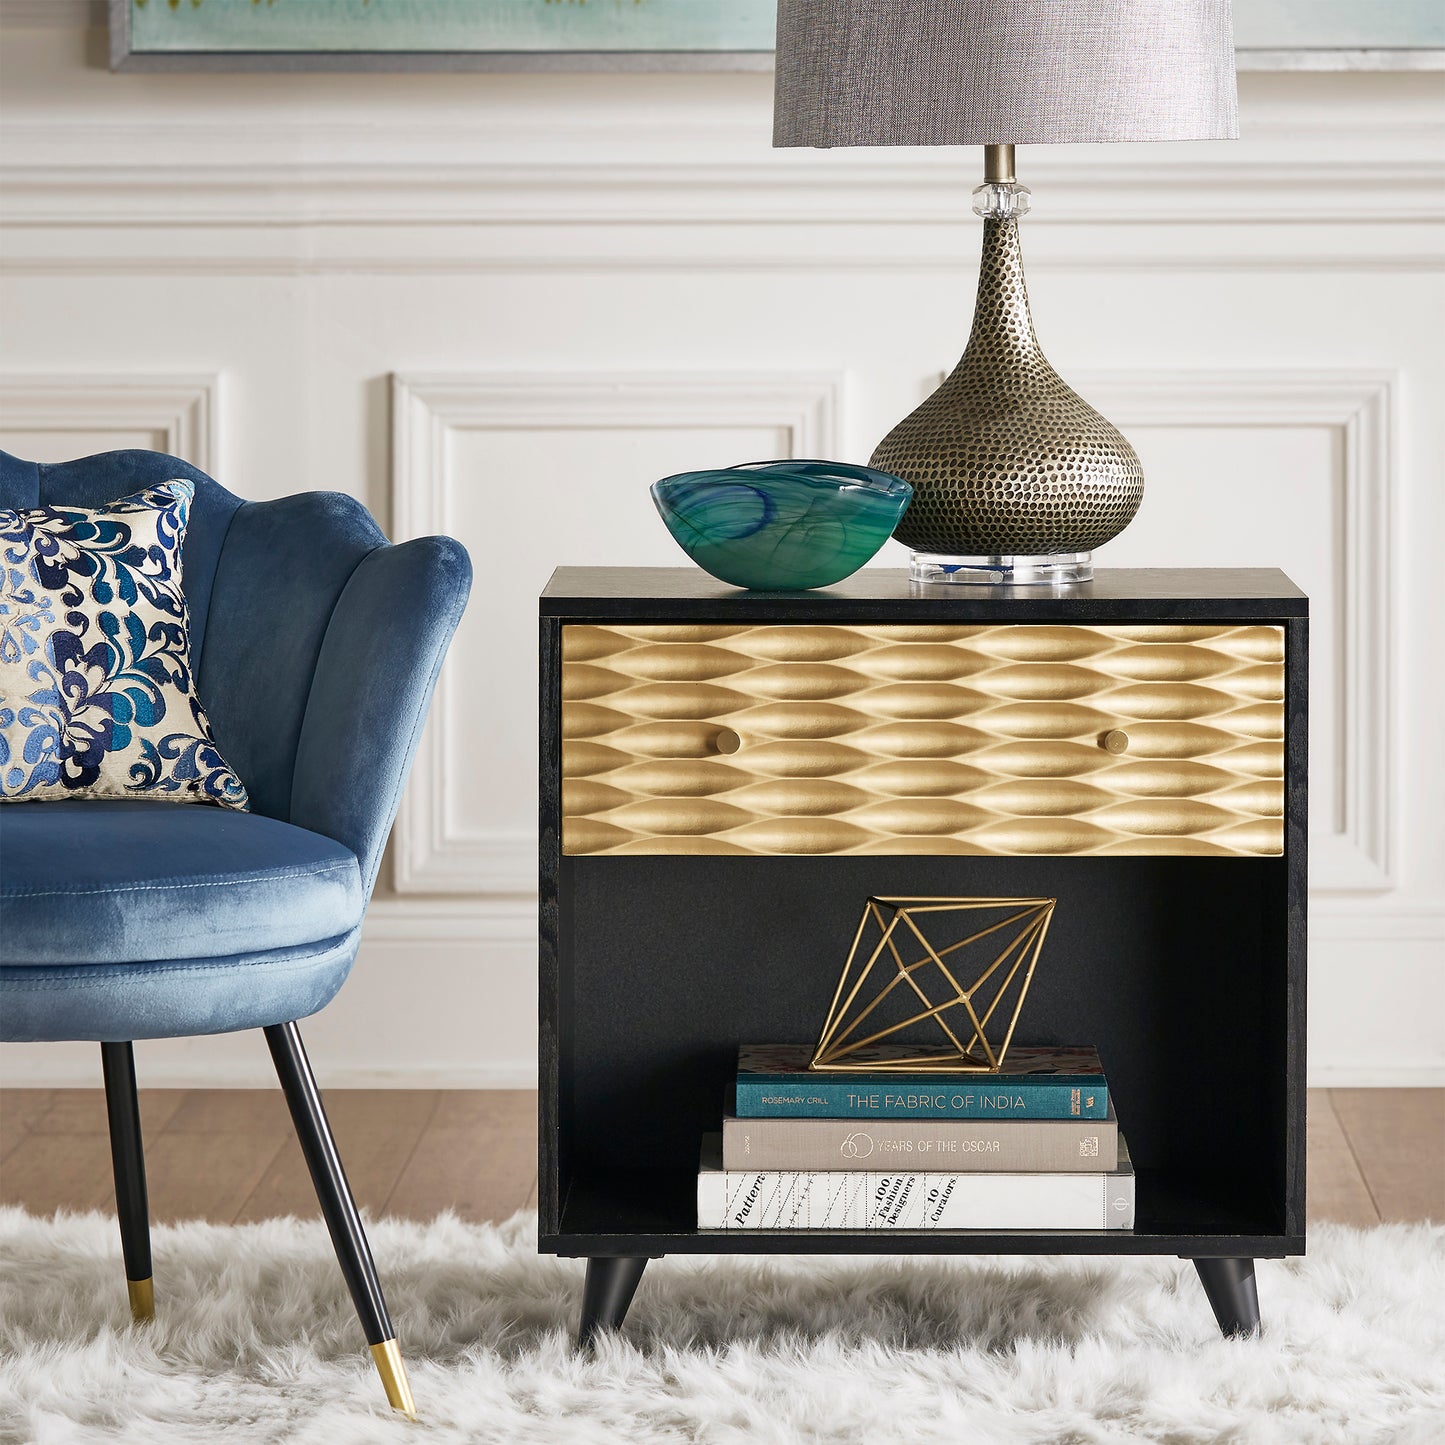 Two-Tone 1-Drawer End Table